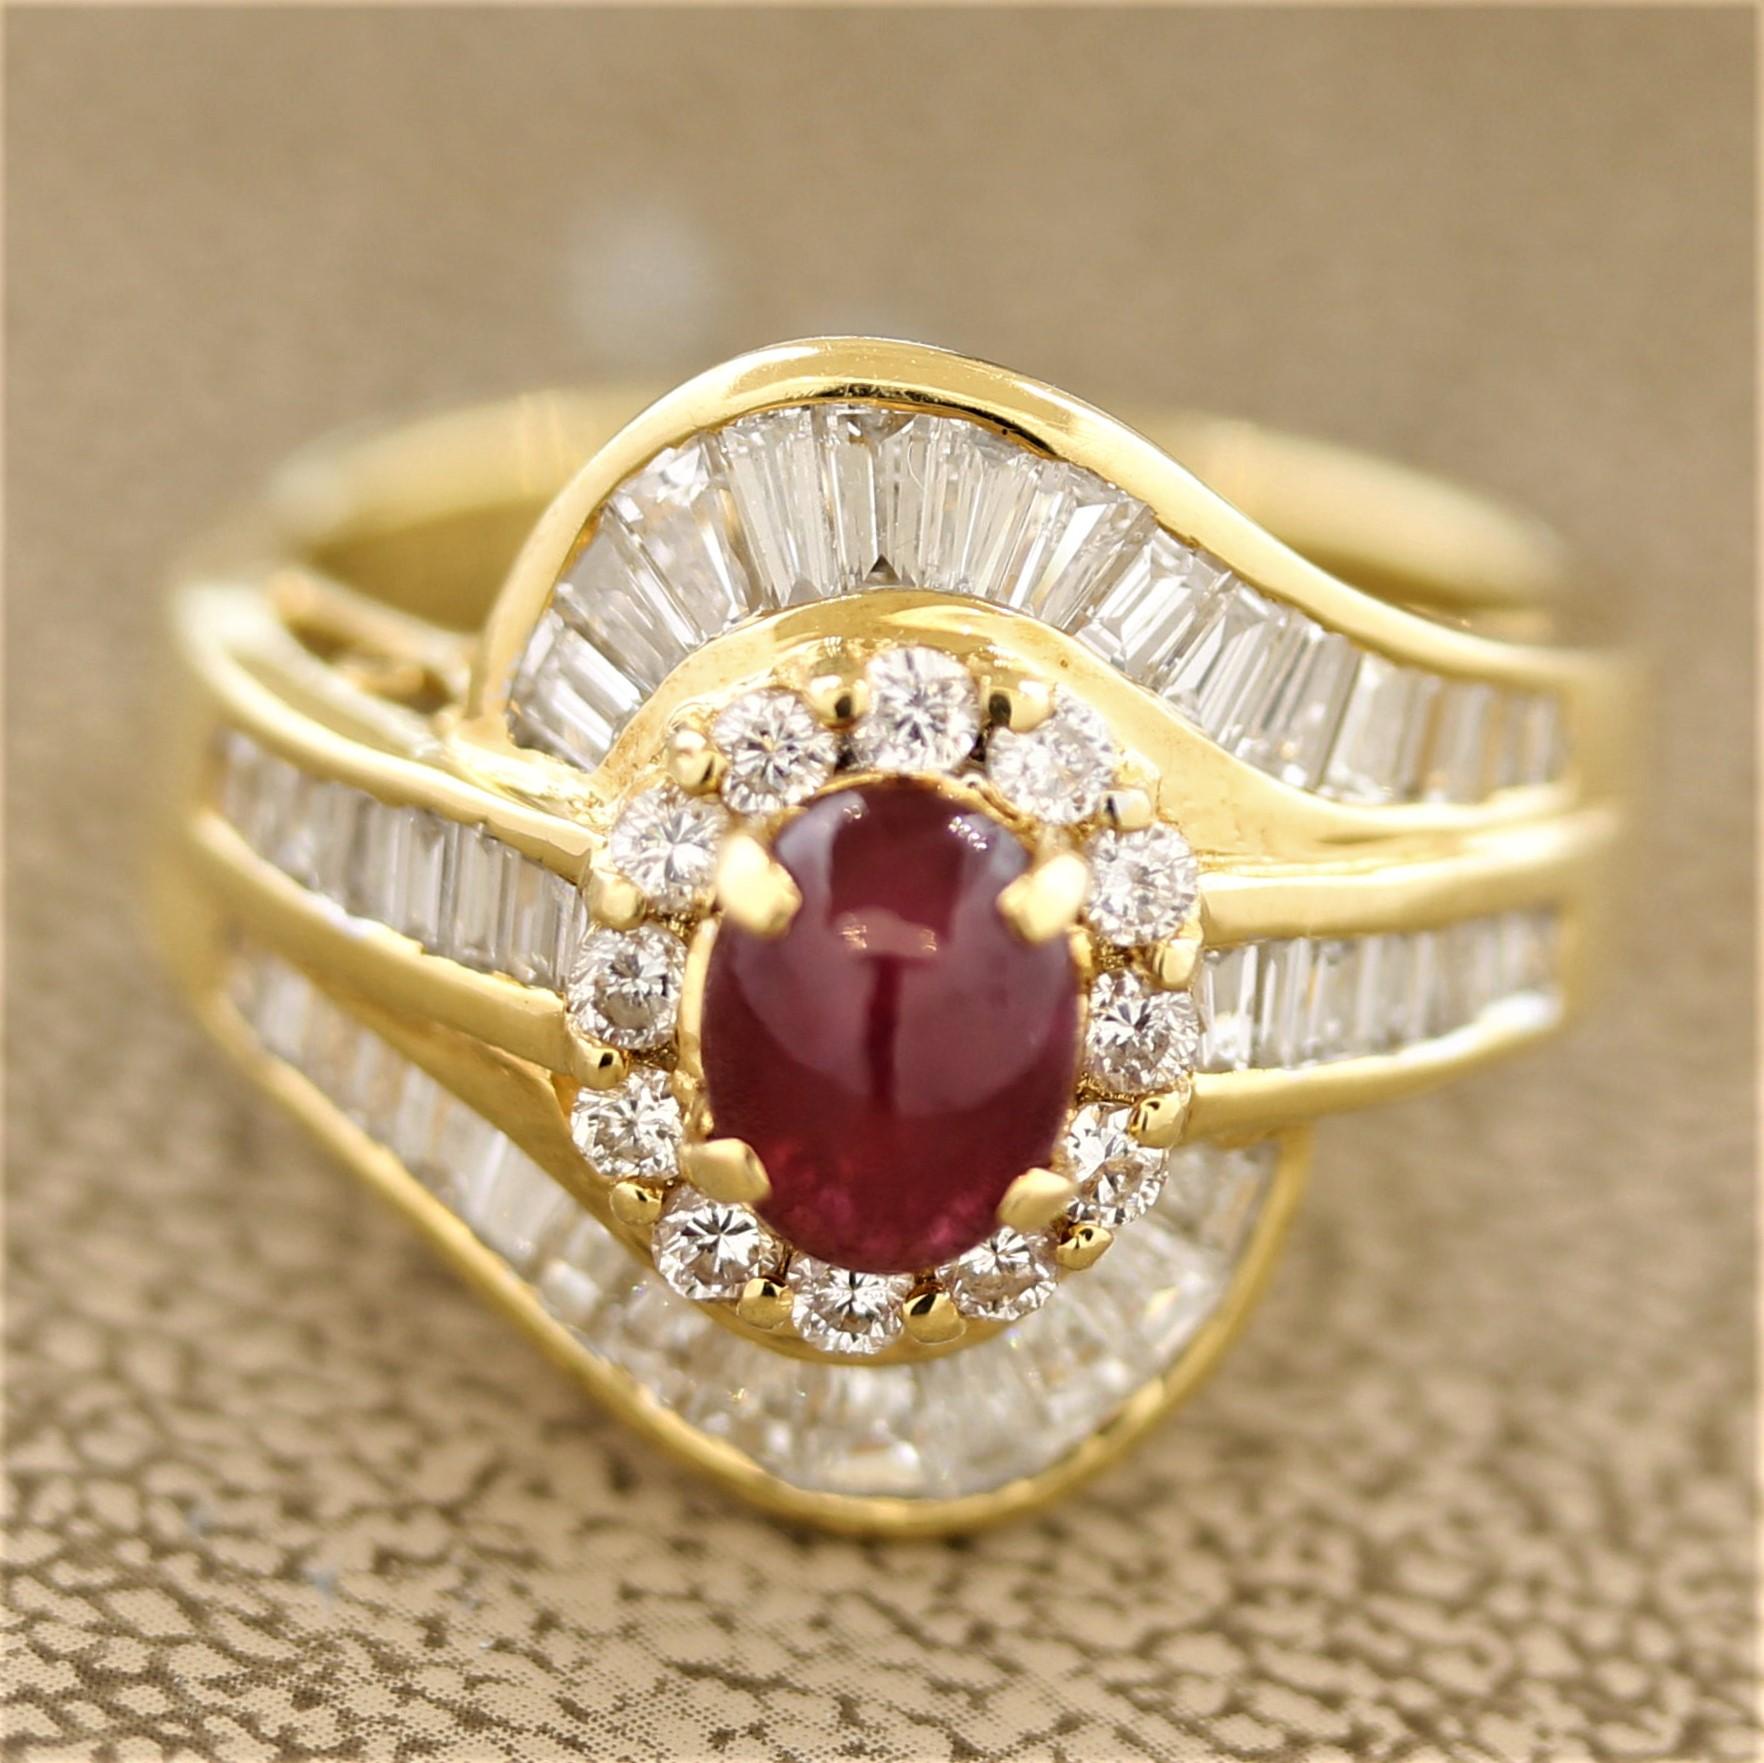 A simple yet elegant ring featuring a 0.95 carat cabochon ruby with a vivid red color. It is accented by 1.25 carats of round brilliant and baguette cut diamonds which surround the ruby and run down the sides of the ring. Made in 18k yellow gold and